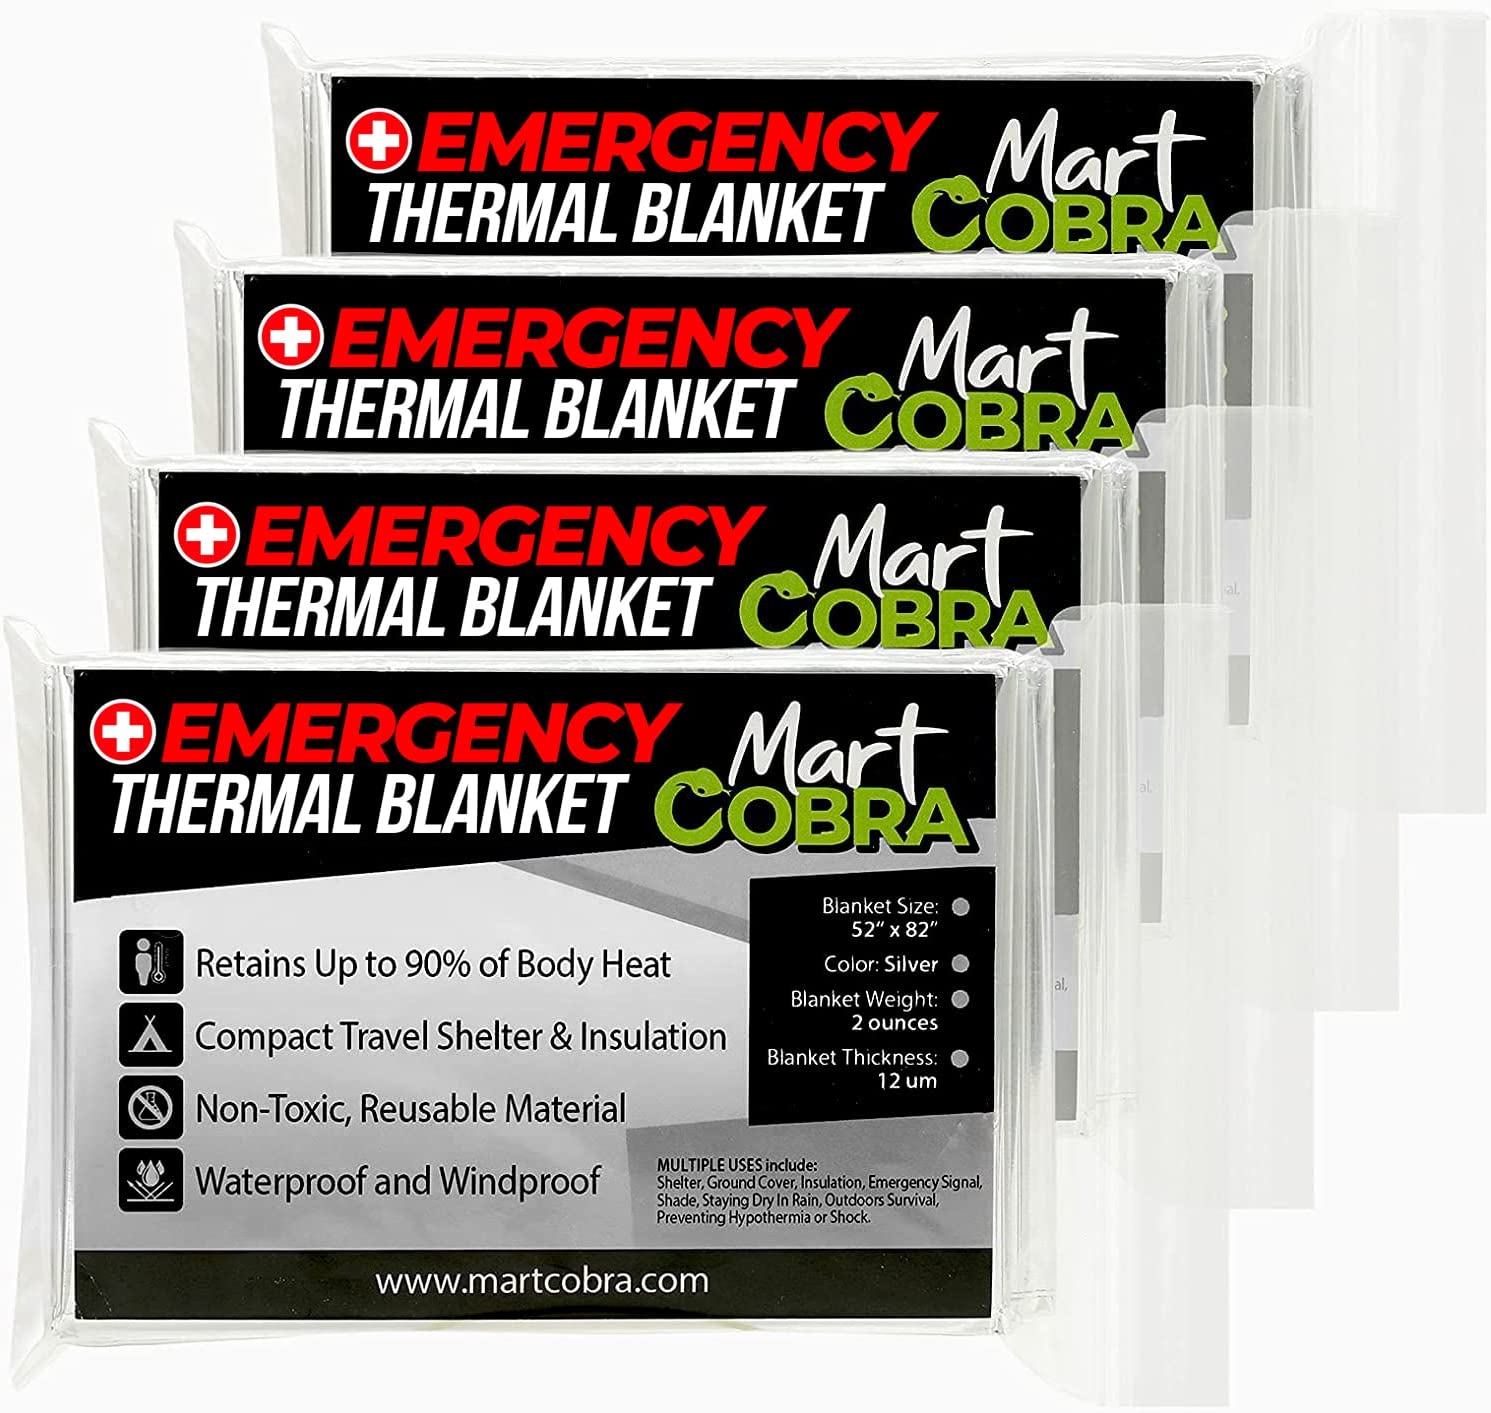 Emergency Blankets for Survival Gear and Equipment x4, Space Blanket, Mylar Blankets, Thermal Blanket, Survival Blanket, Survival Kits Emergency Kit, Emergency Supplies, Foil Blanket Camping Shelter